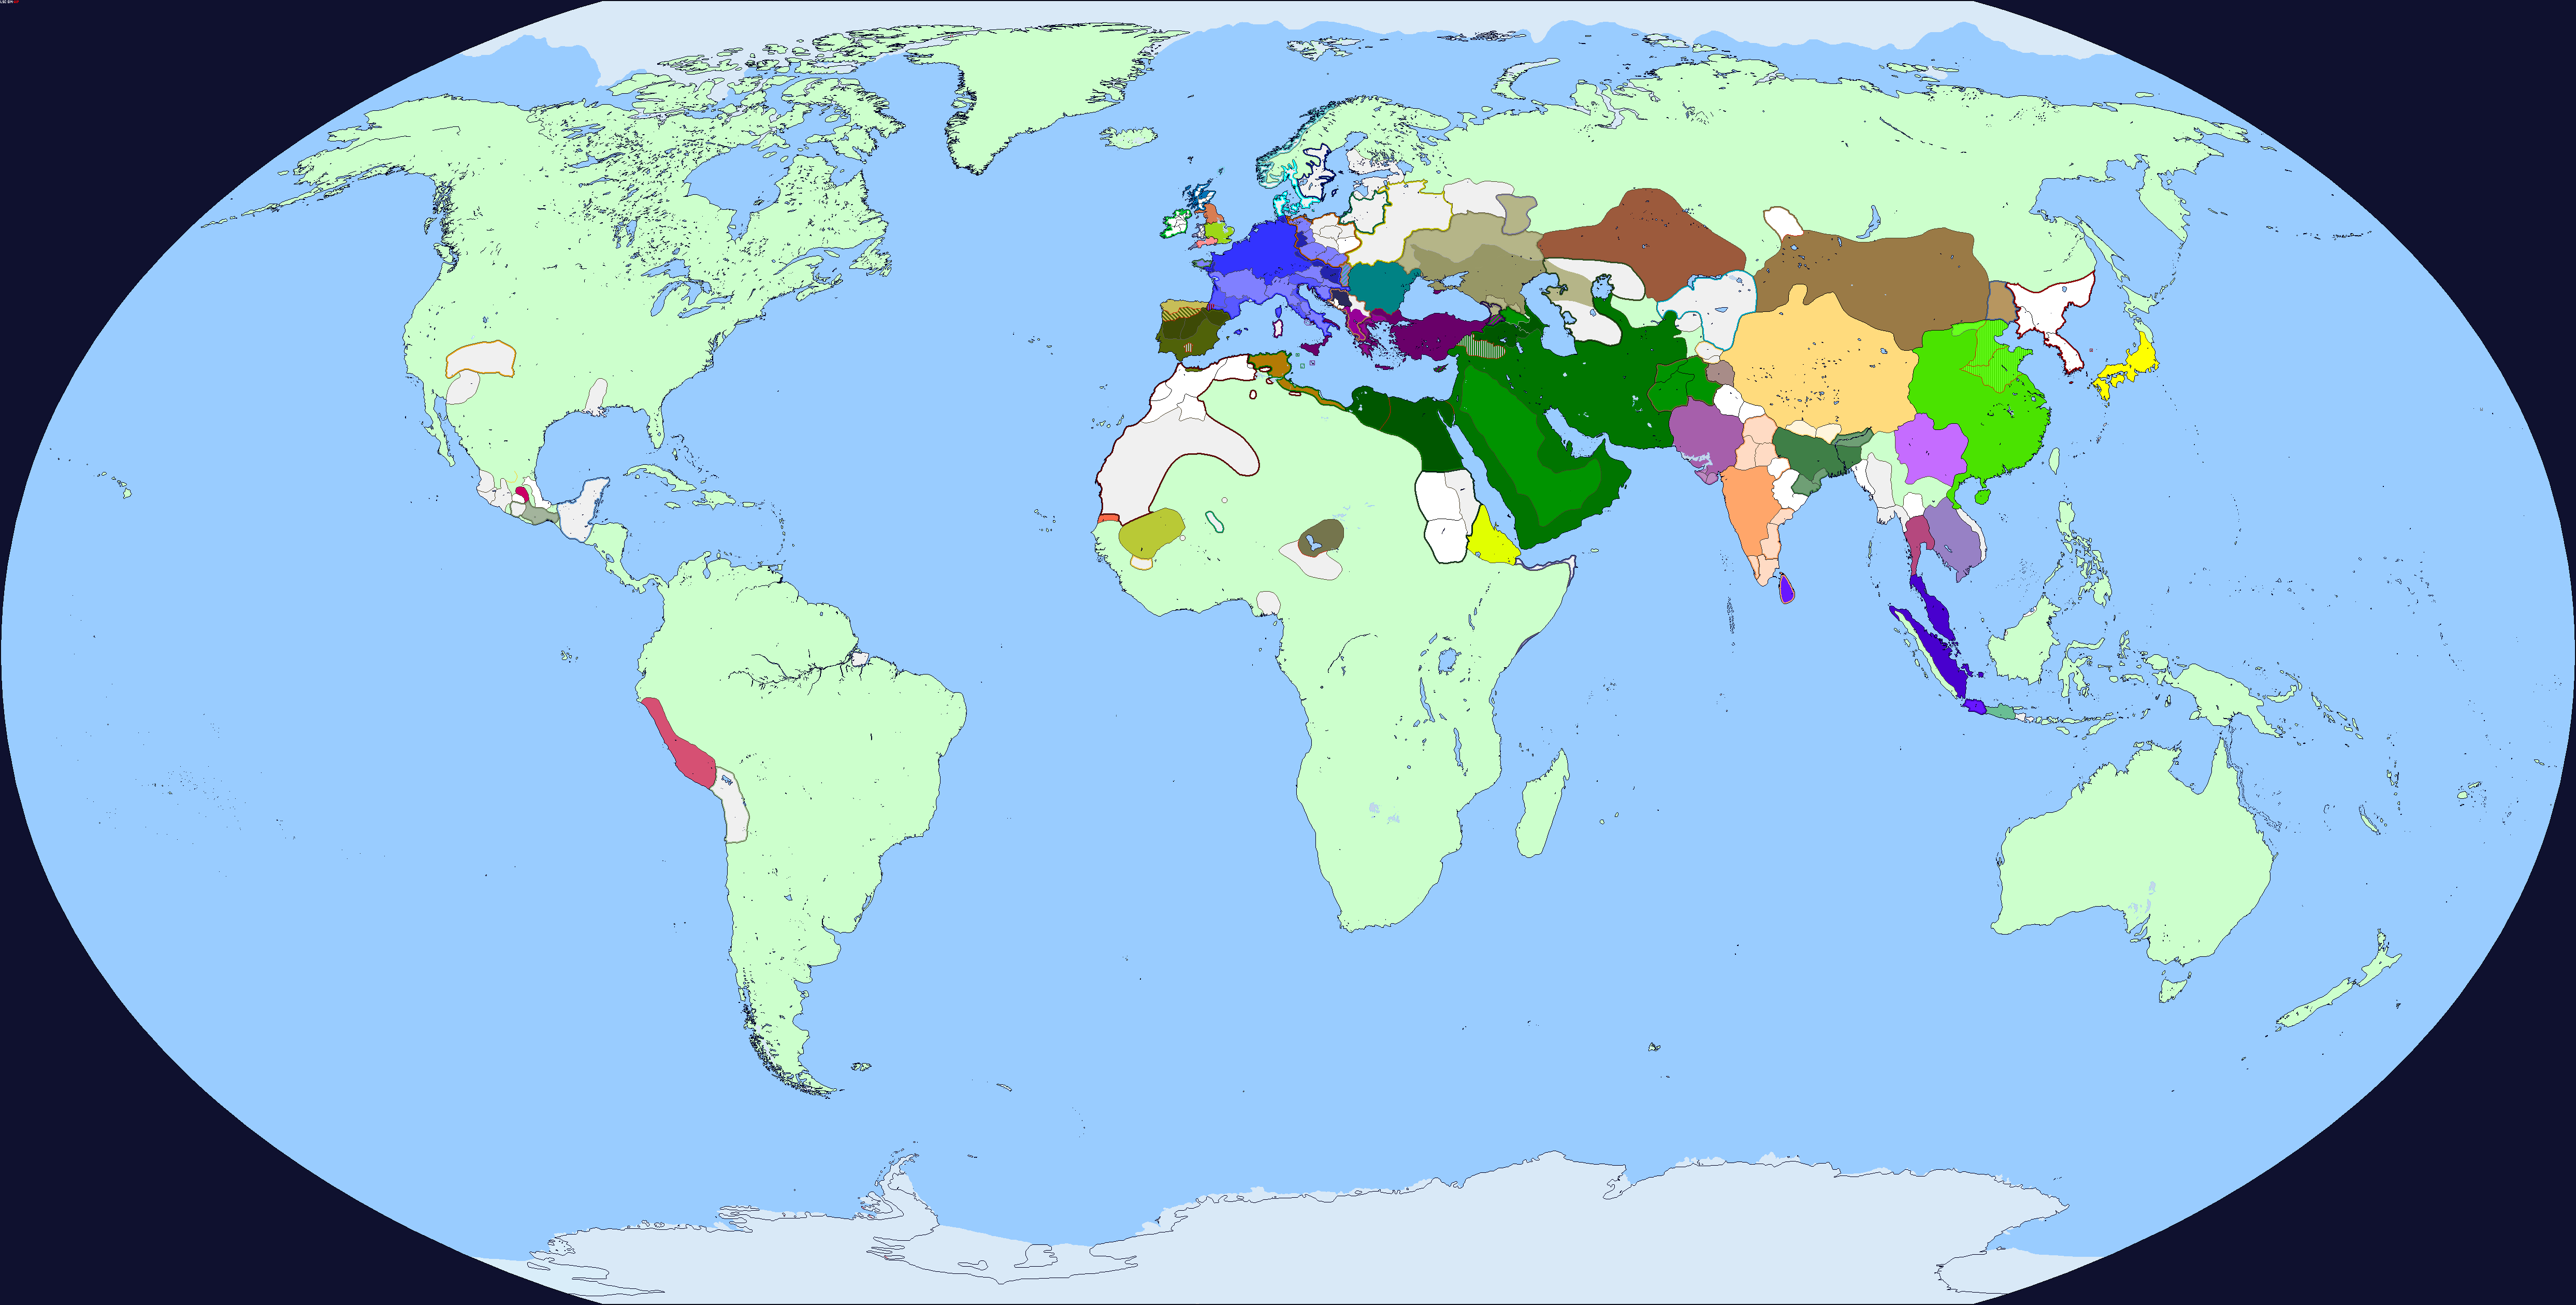 q_bam_world_map__political_only__by_dinospain-dcfa8uq.png